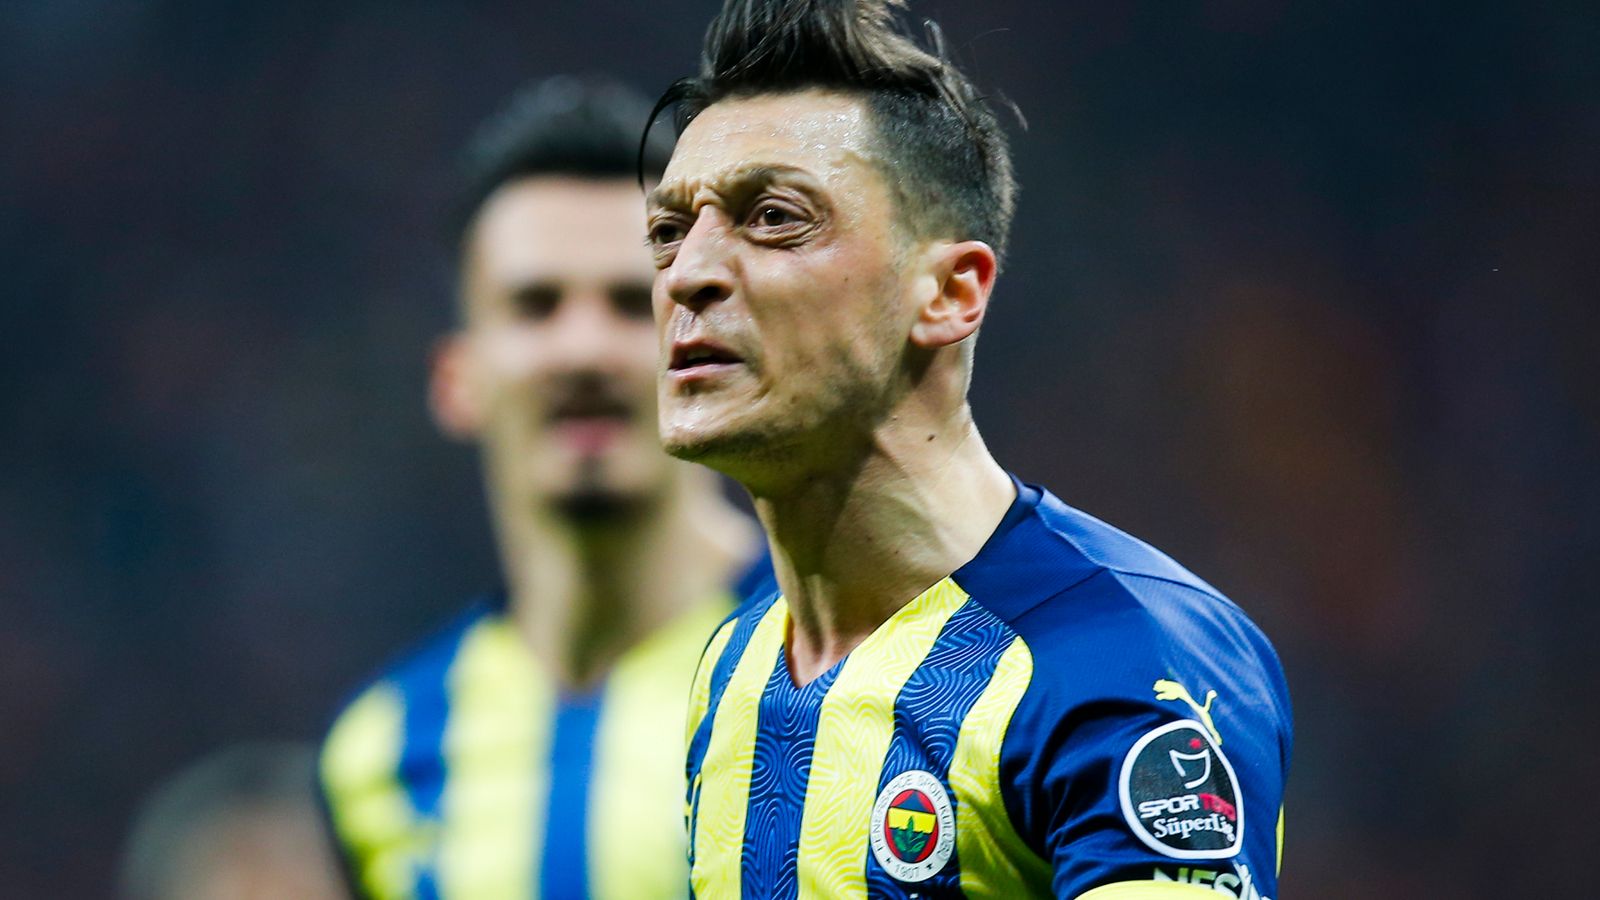 Mesut Ozil will move into eSports after Fenerbahce, says German’s agent